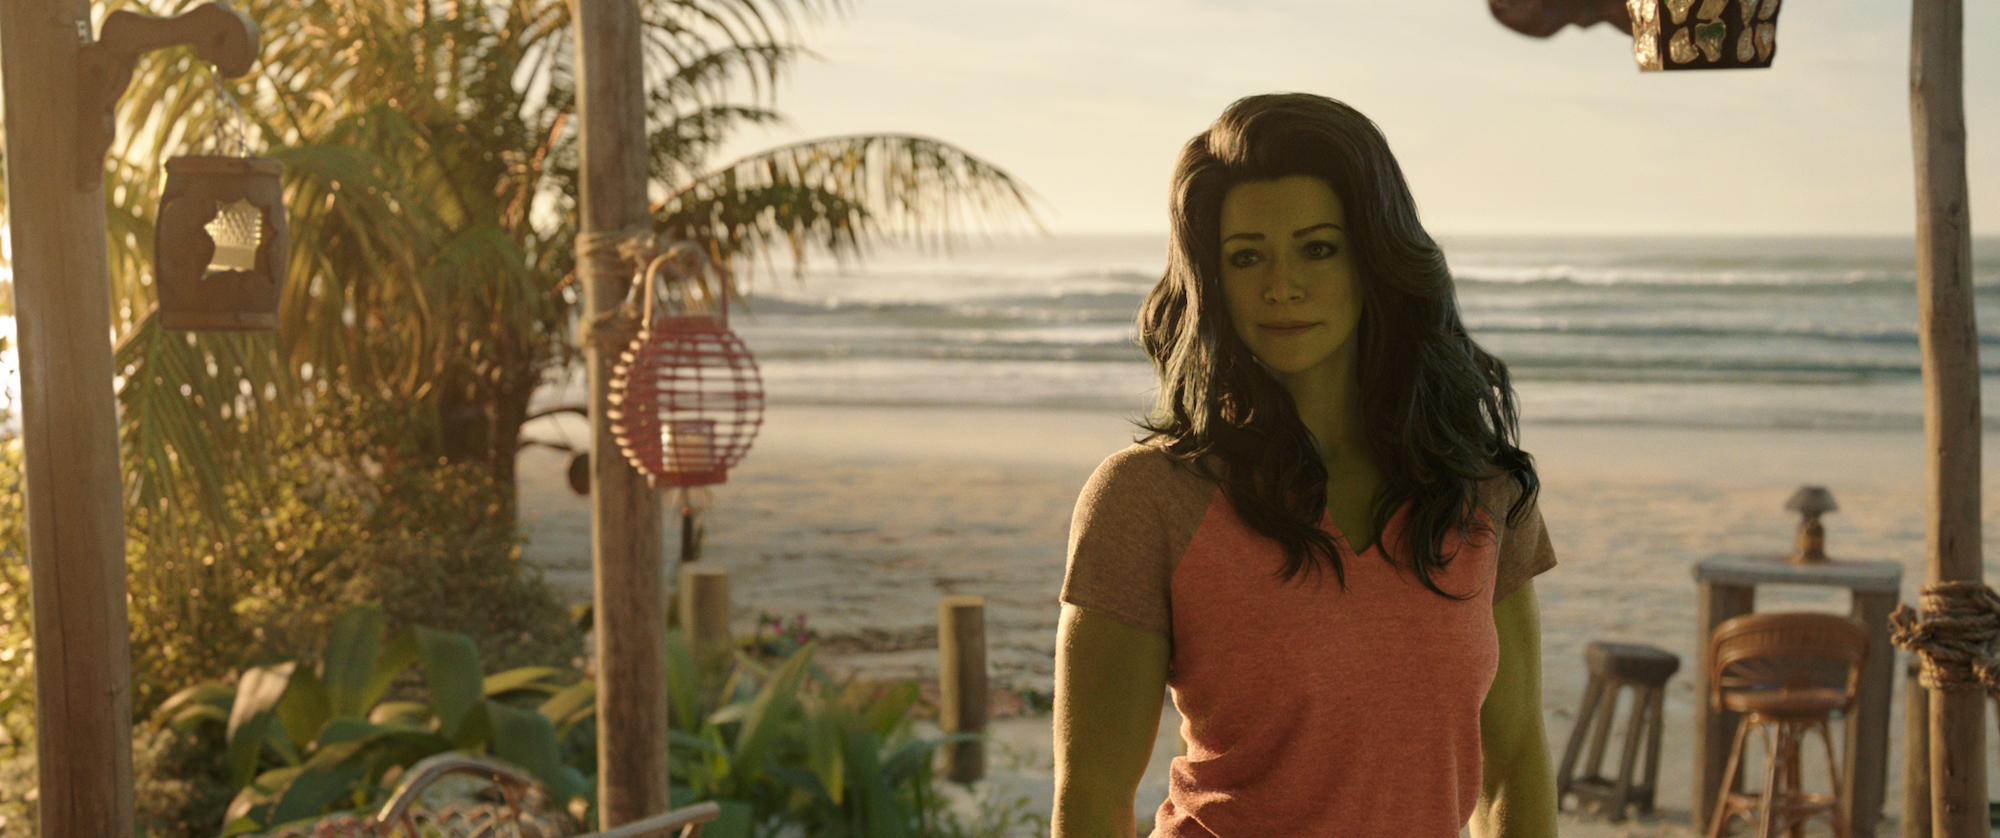 ‘She-Hulk’ Star Tatiana Maslany Recalls Being Rejected for a Different Marvel Role